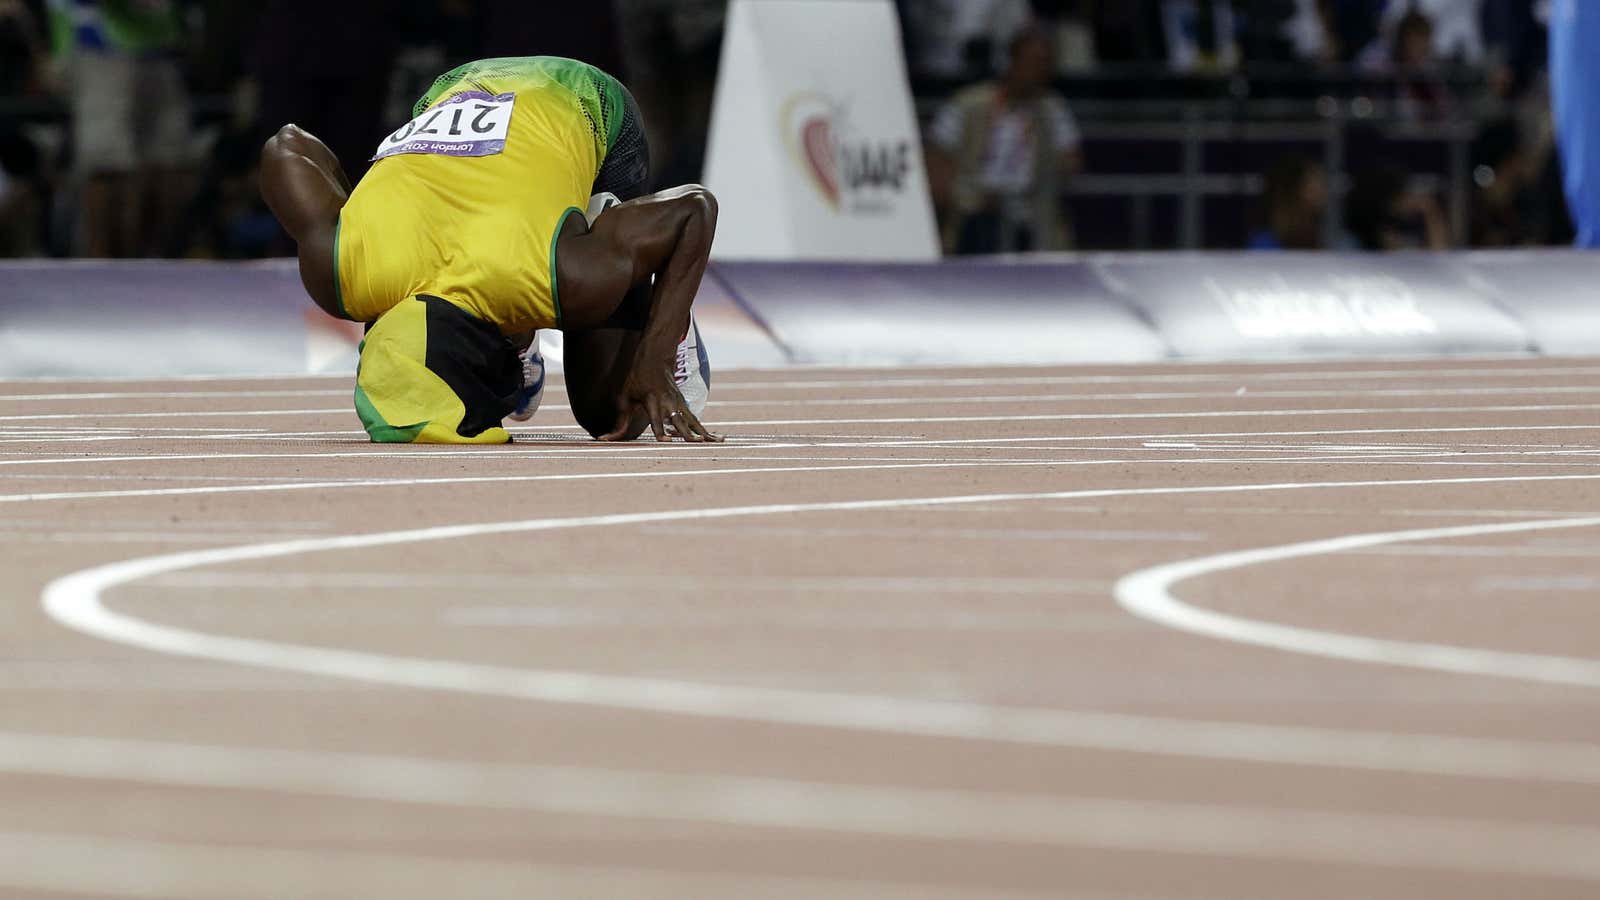 It’s okay Usain, if you donate your gold medal to charity you won’t get taxed on it.